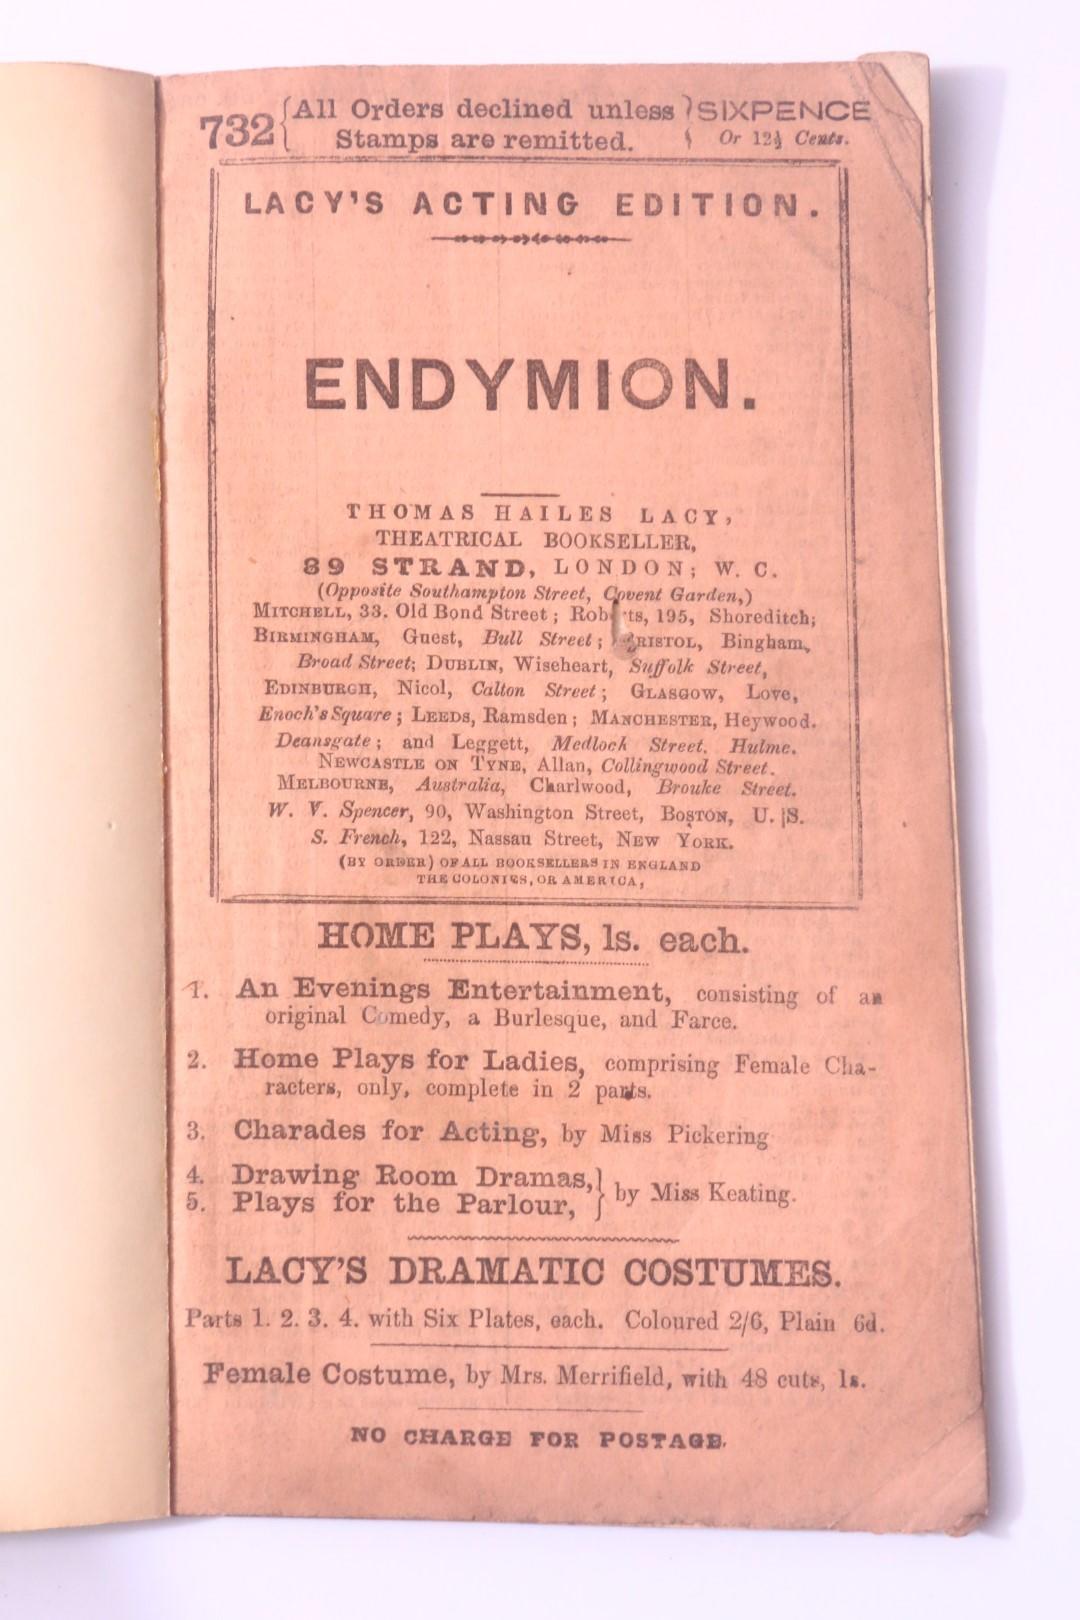 William Brough - Endymion, or, The Naughty Boy who Cried for the Moon : a Classical Mythological Extravaganza in One Act - Thomas Hailes Lacy, n.d. [1861?], Signed First Edition.